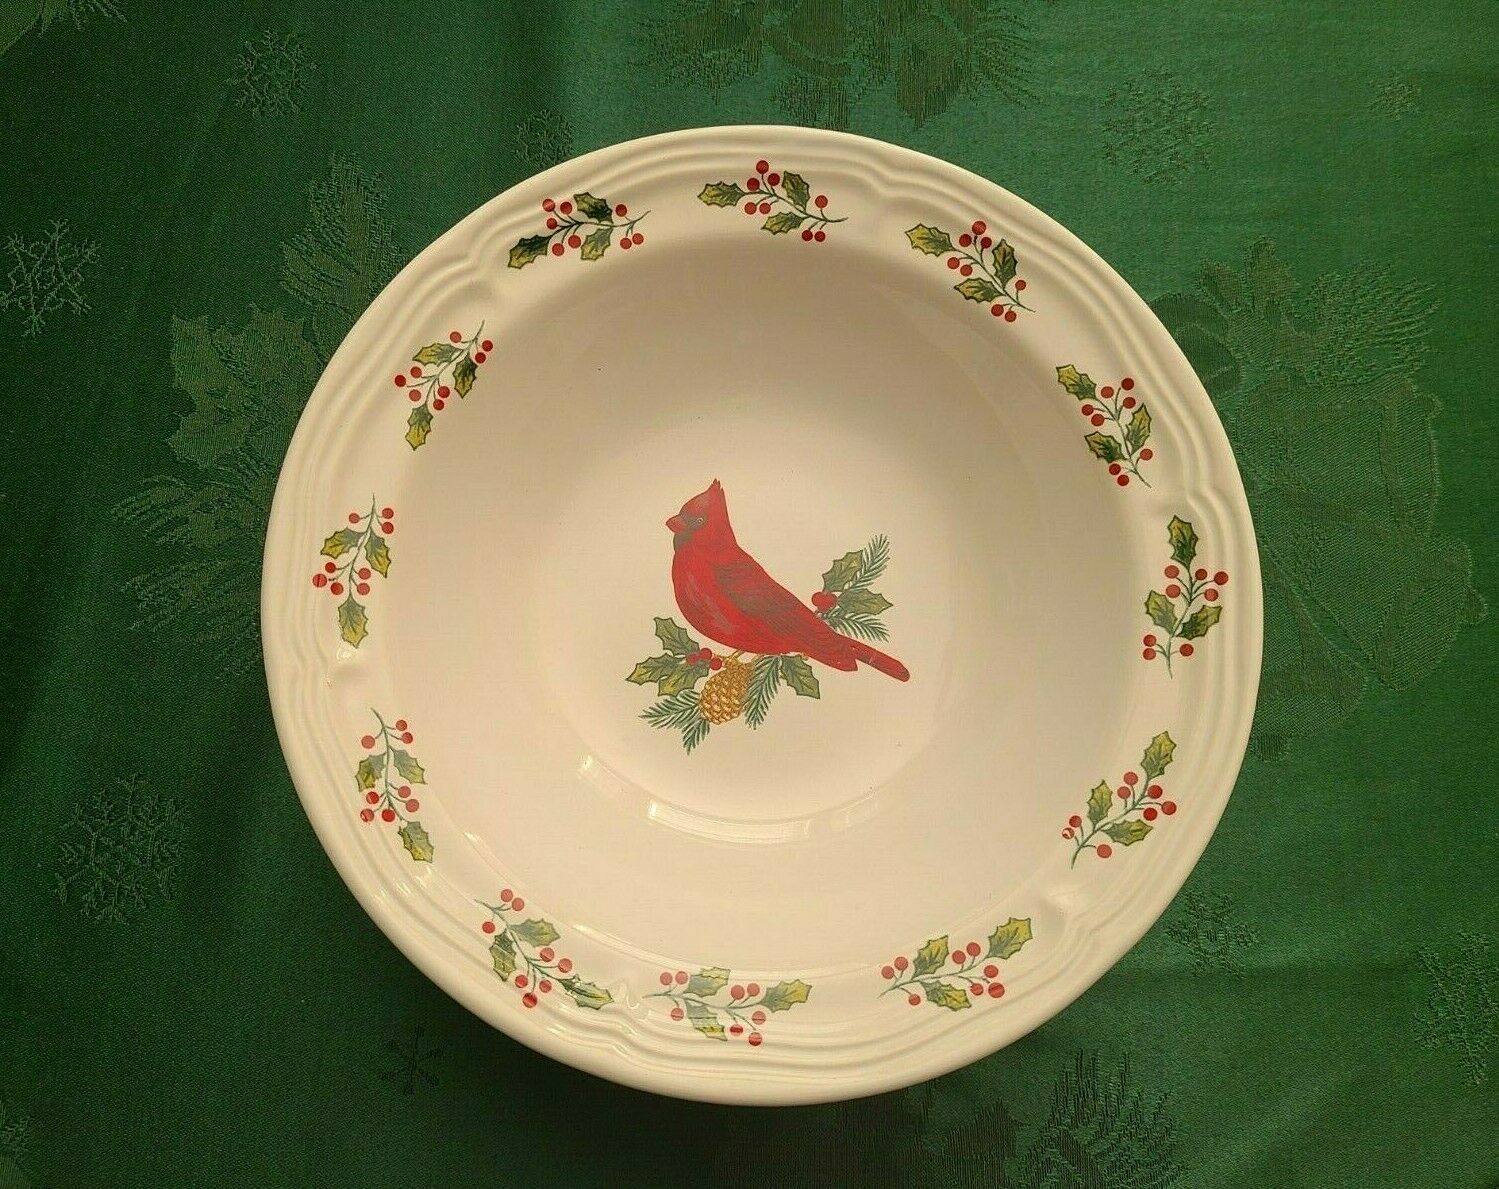 GIBSON DESIGNS Winter Birds Rim Soup Bowl Cardinal and Holly Christmas Dishware - $9.99